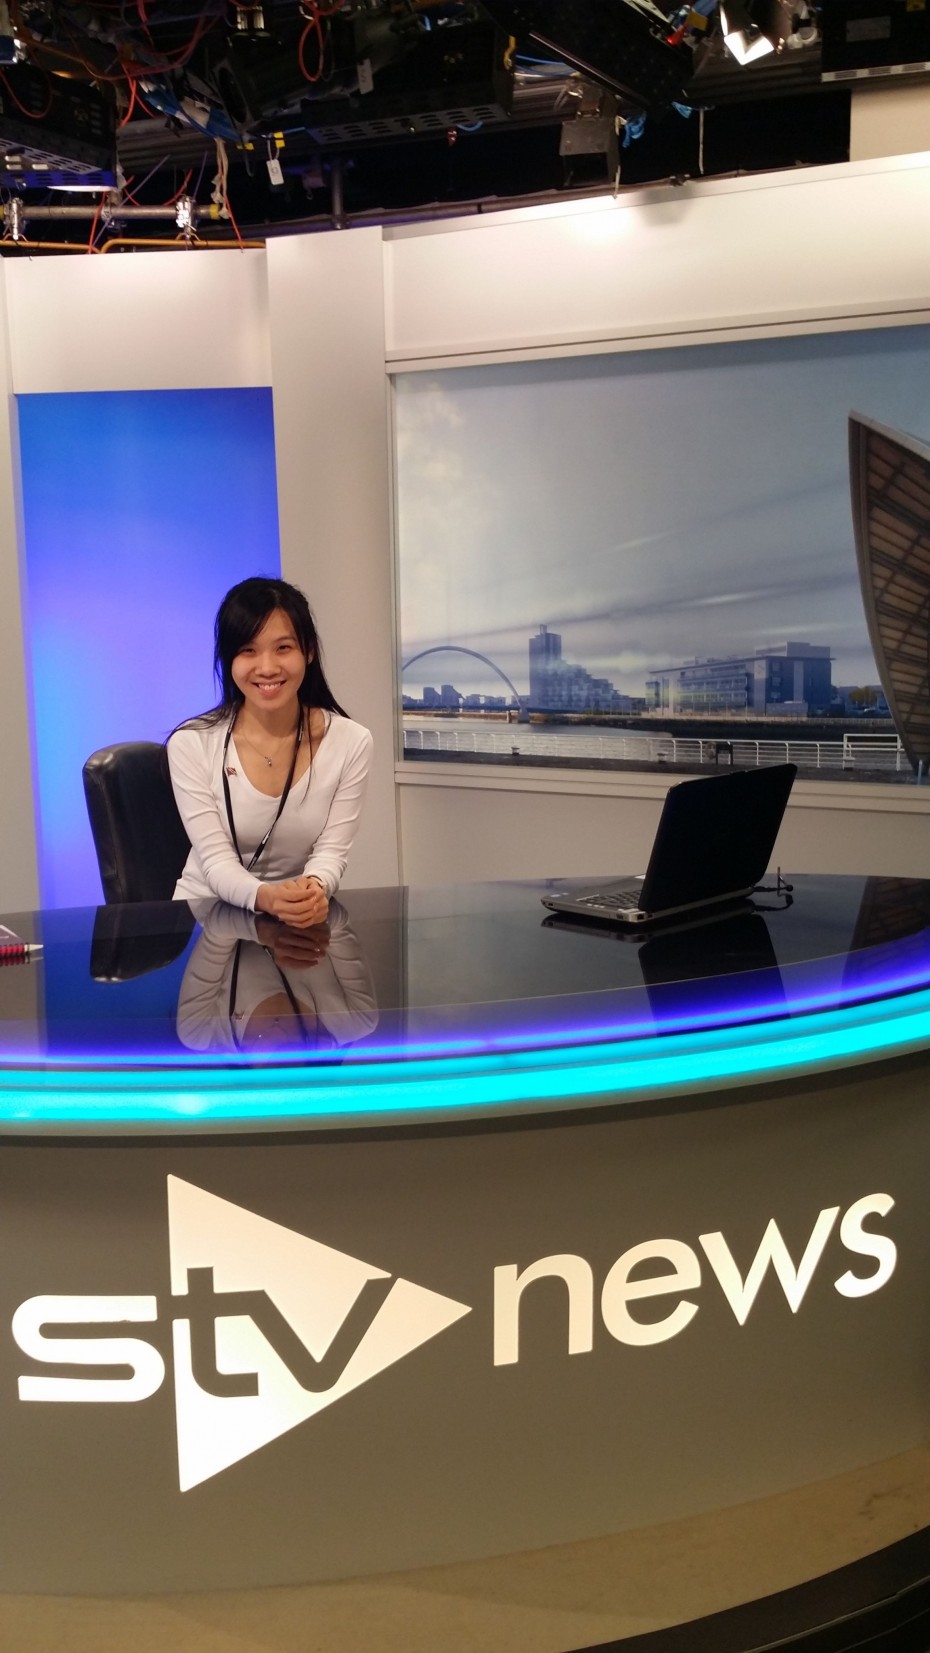 A BRATs exclusive: BRATs journalist Carissa Tan was sent to Glasgow, Scotland earlier this year for the Aye! Write Future News conference. She is pictured here trying her hand at news reading at the STV News studio.